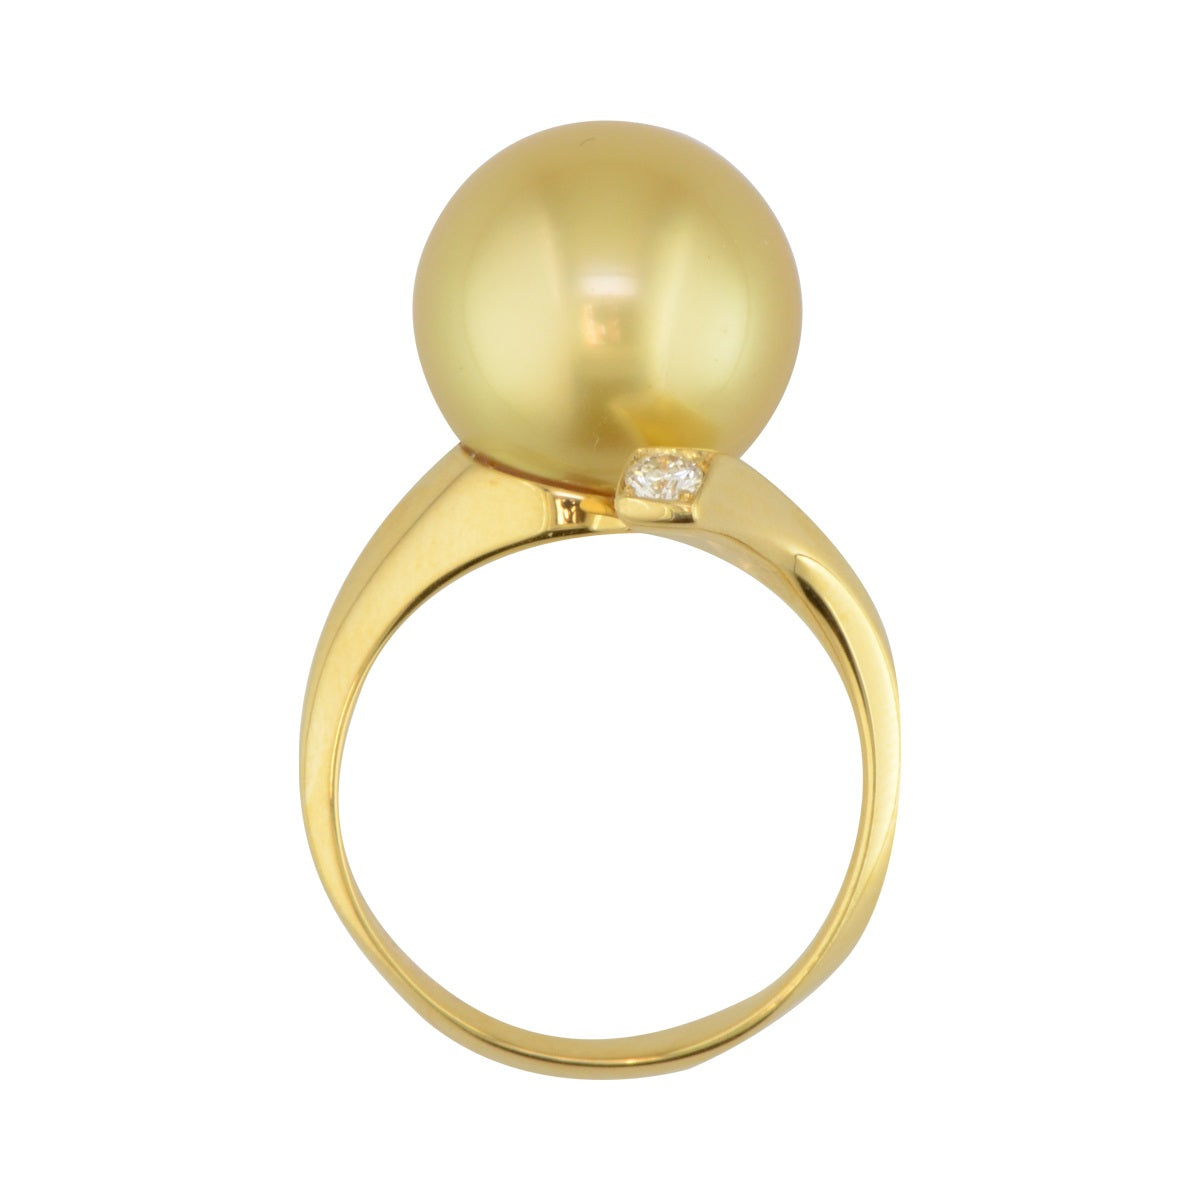 Yellow gold and Golden Pearl ring with diamond accent. 